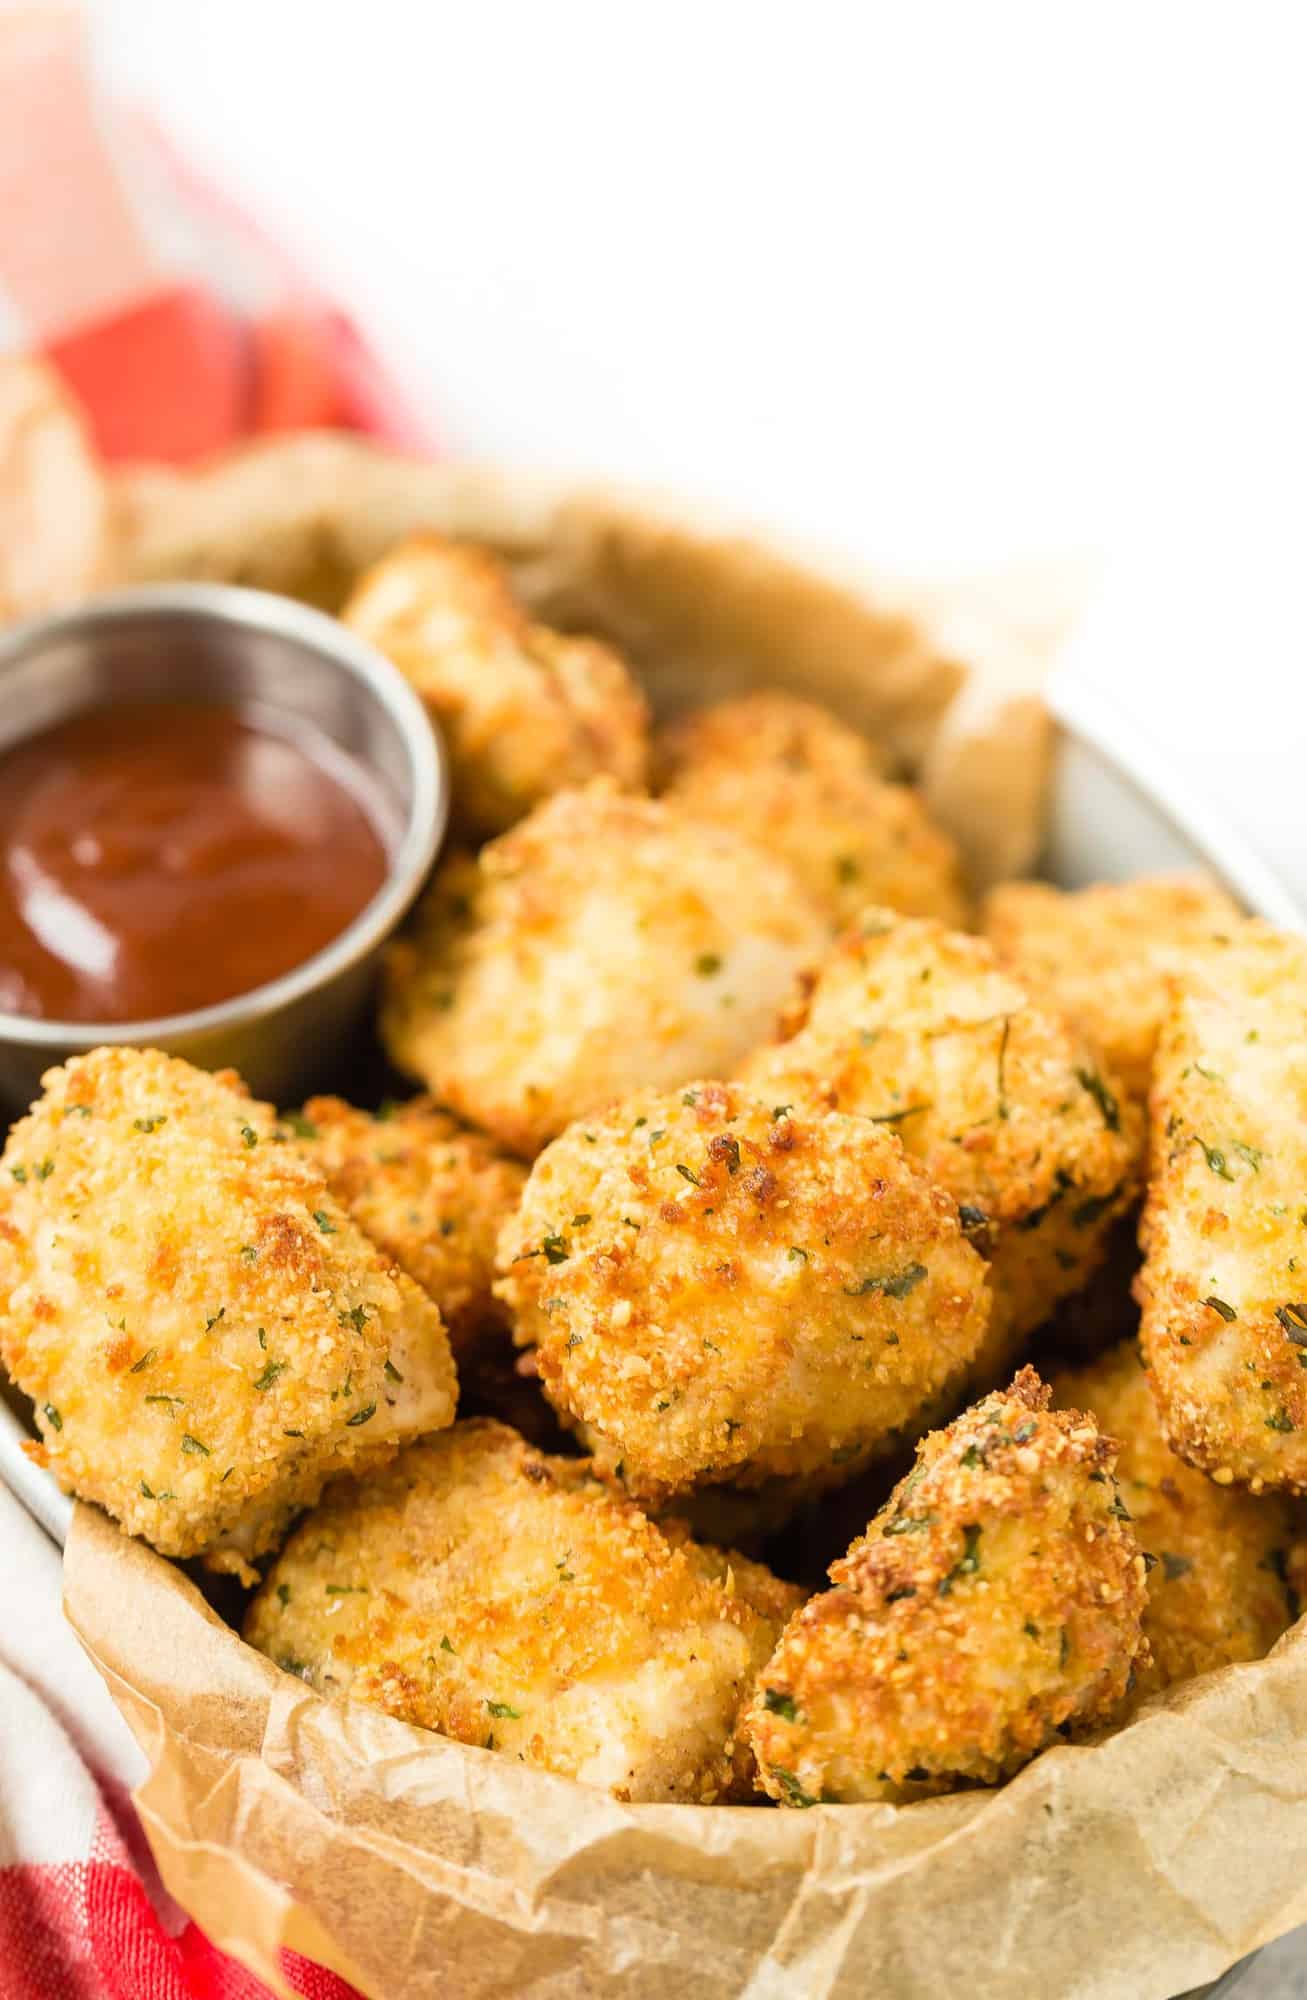 Breaded chicken nuggets in a metal basket lined with brown parchment paper.